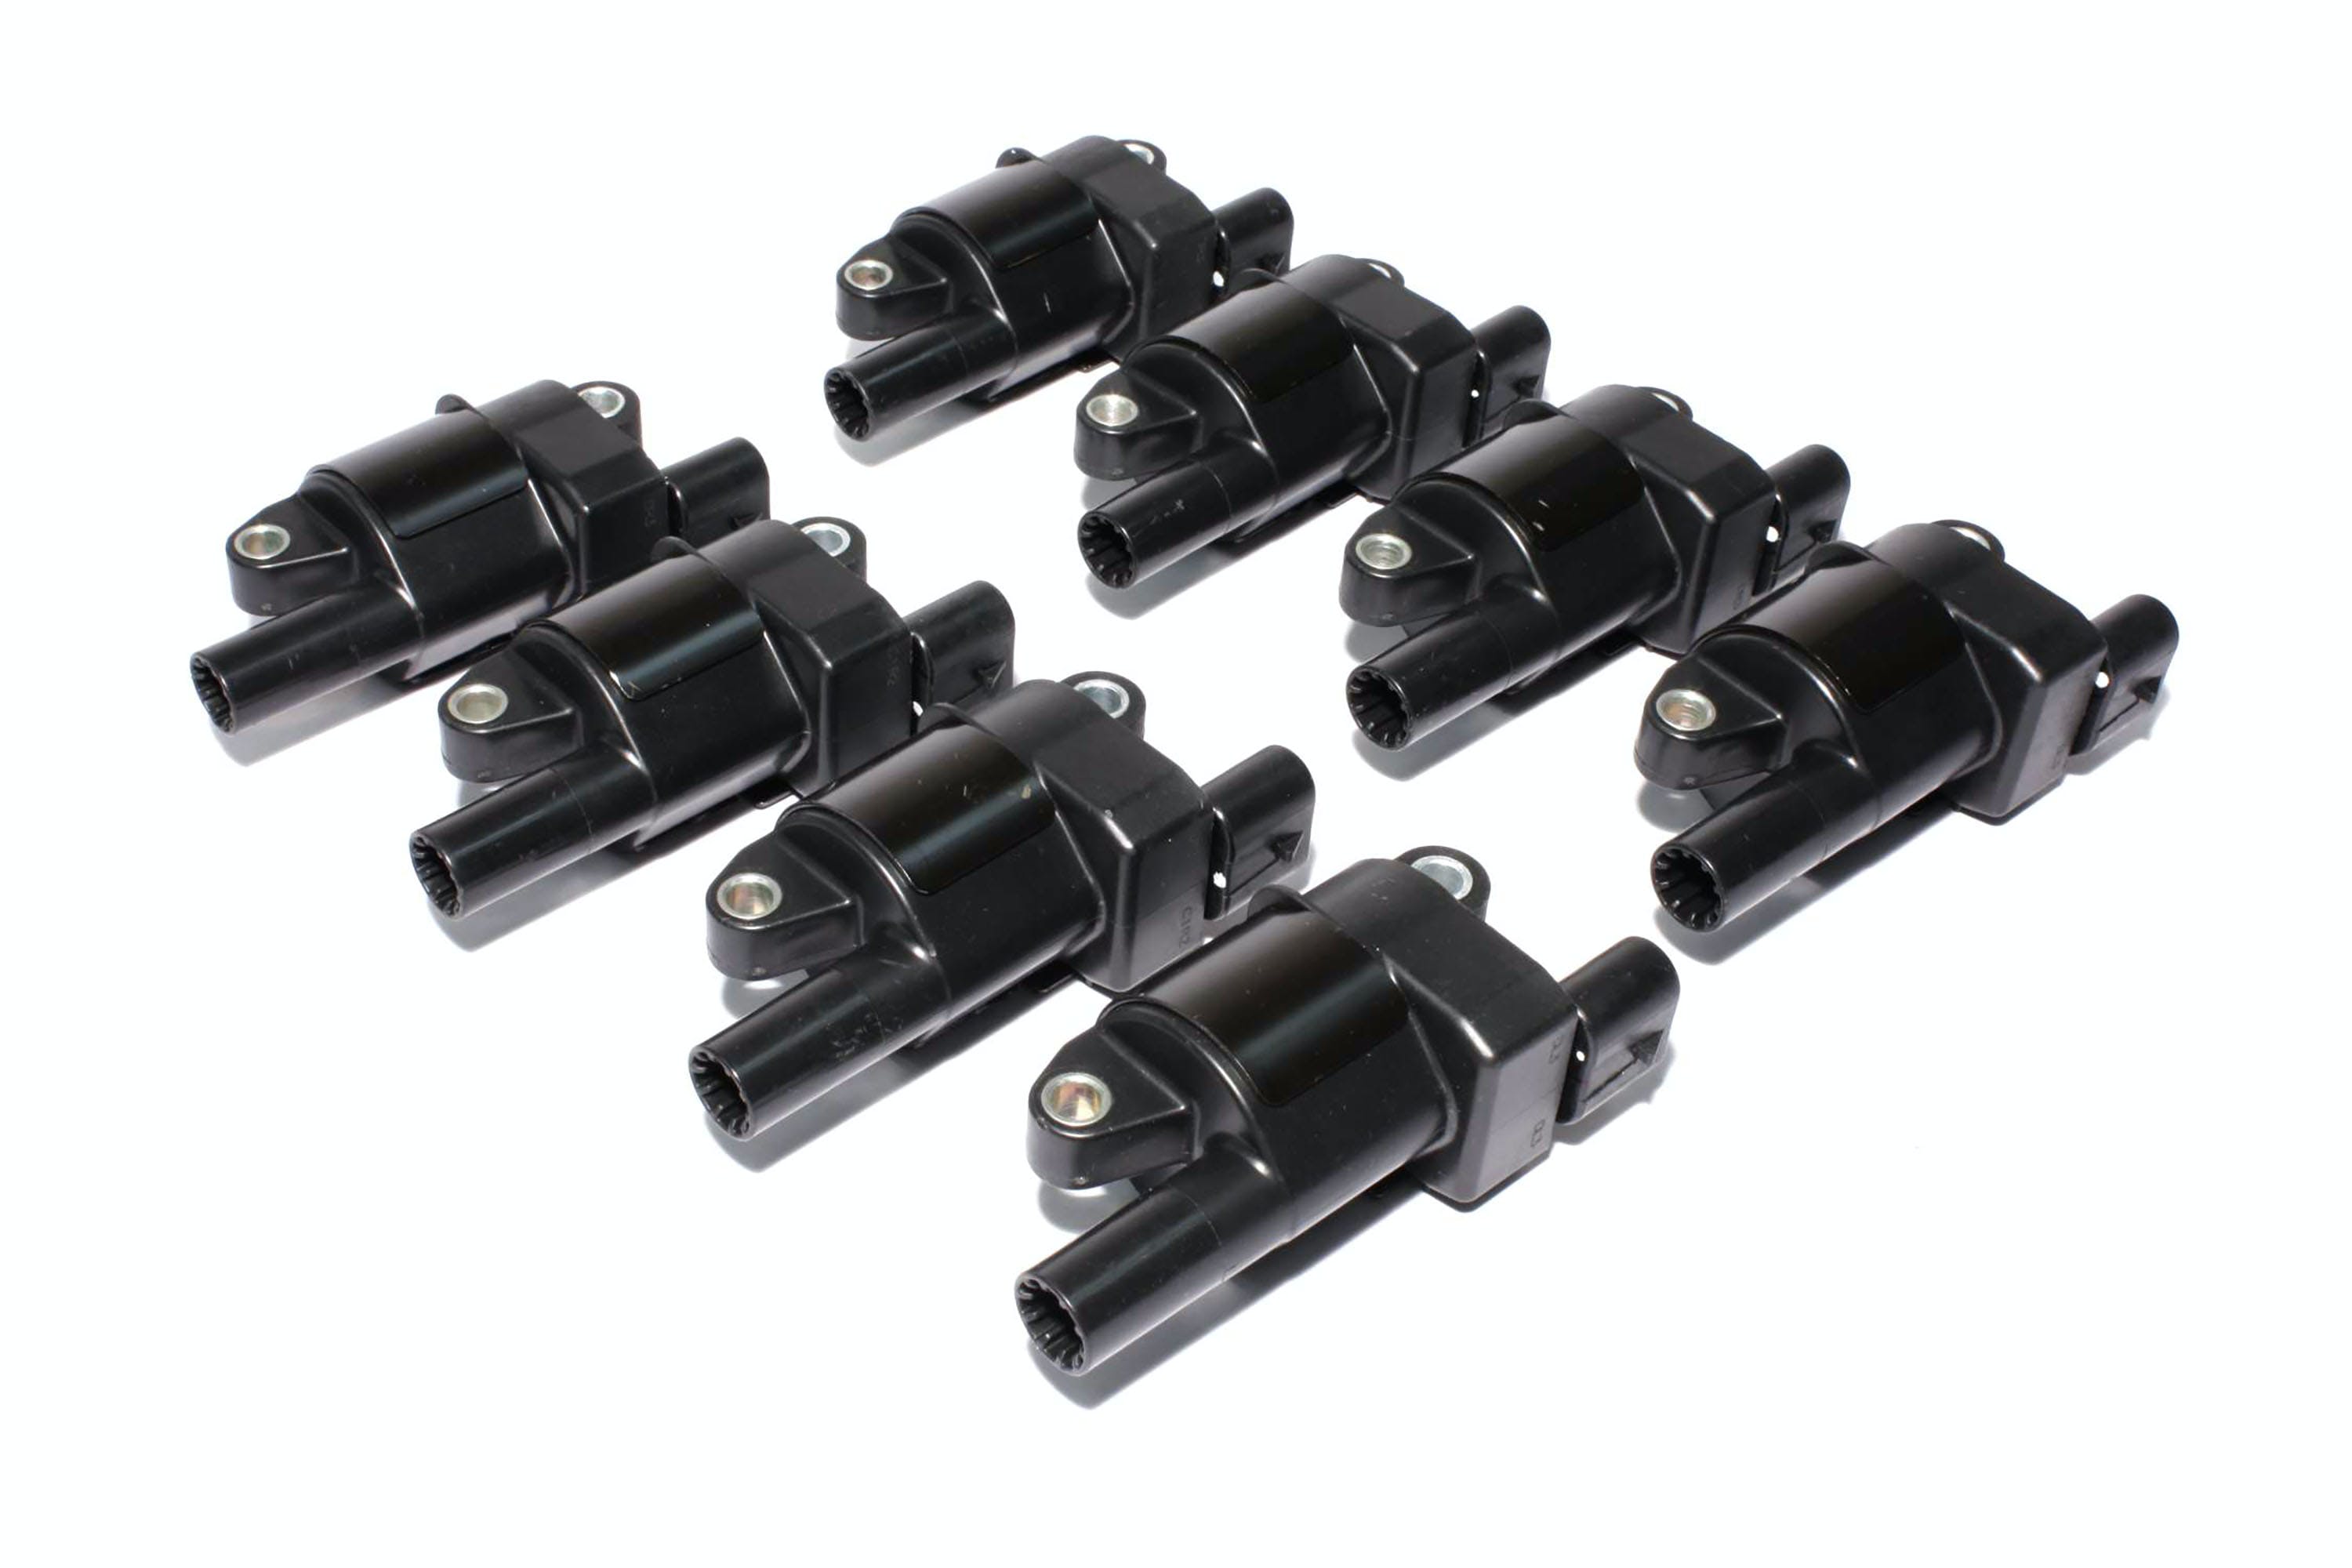 FAST - Fuel Air Spark Technology 30256-8 GM Gen IV L92 Truck Style Coil 8 Pack